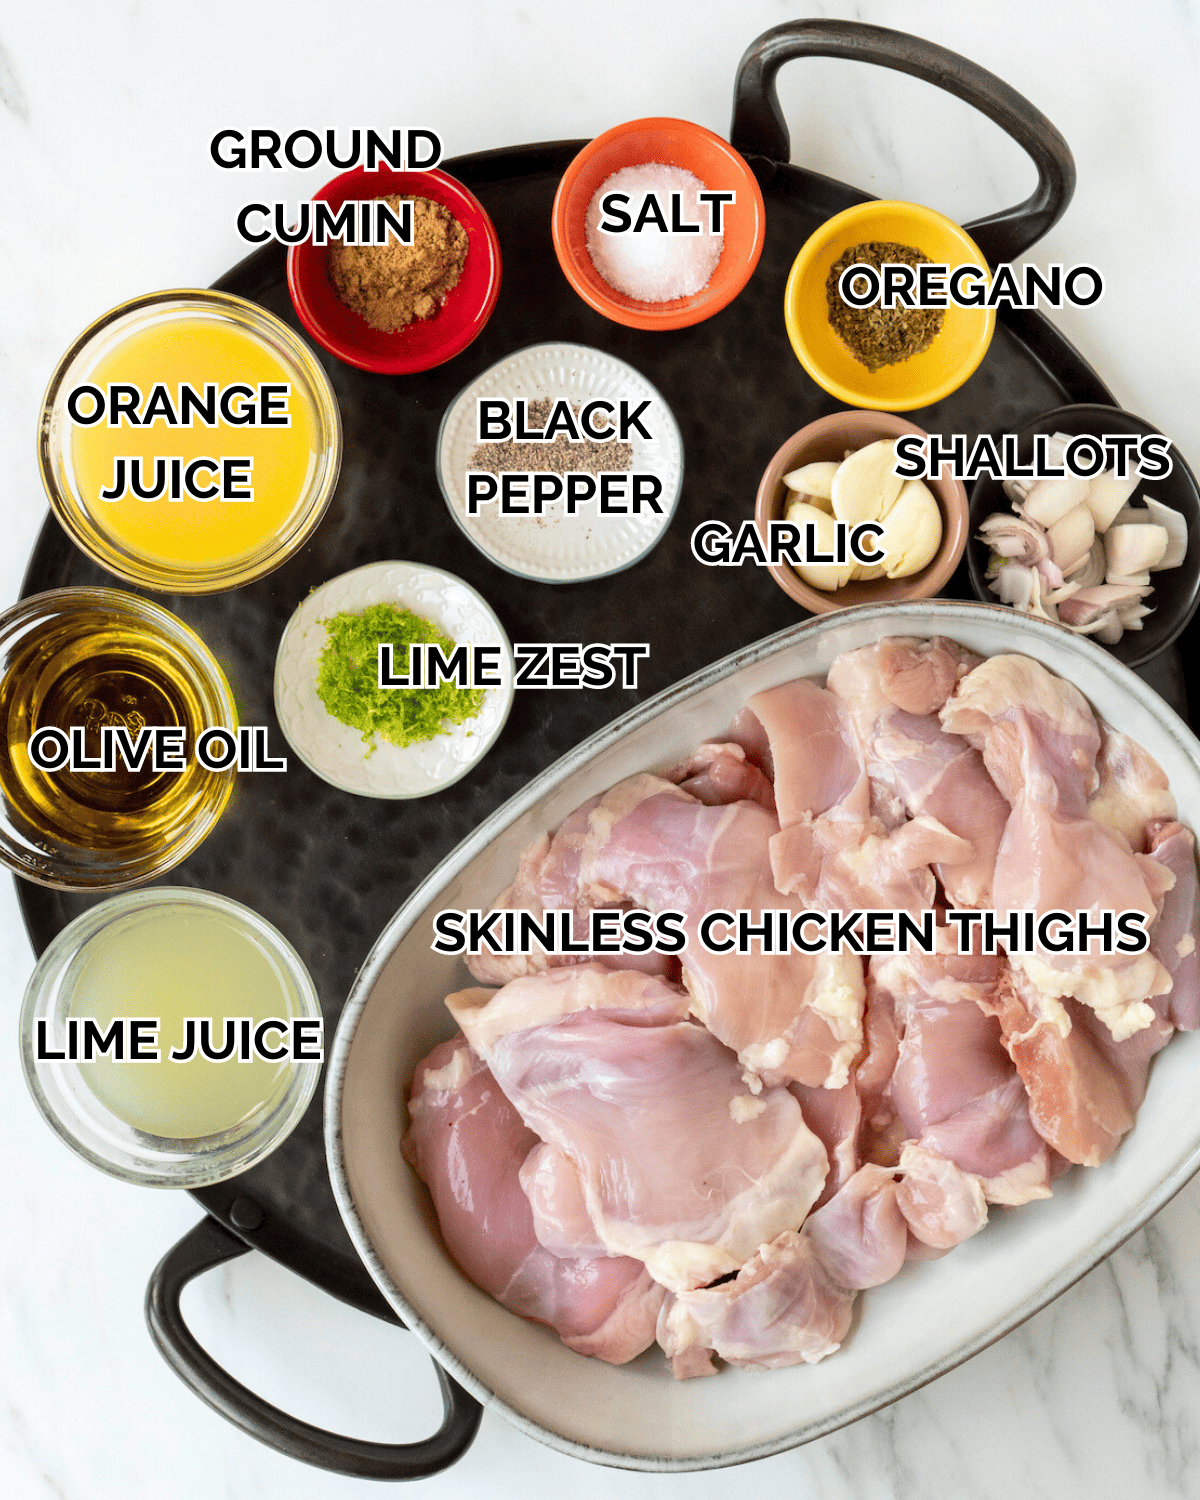 A plate that has all the ingredients in tiny prep bowls.  The ingredients displayed are Ground Cumin, Salt, Oregano, Black Pepper, Garlic, Shallots, Lime Zest, Orange Juice, Olive Oil, Lime Juice, and Chicken Thighs. 